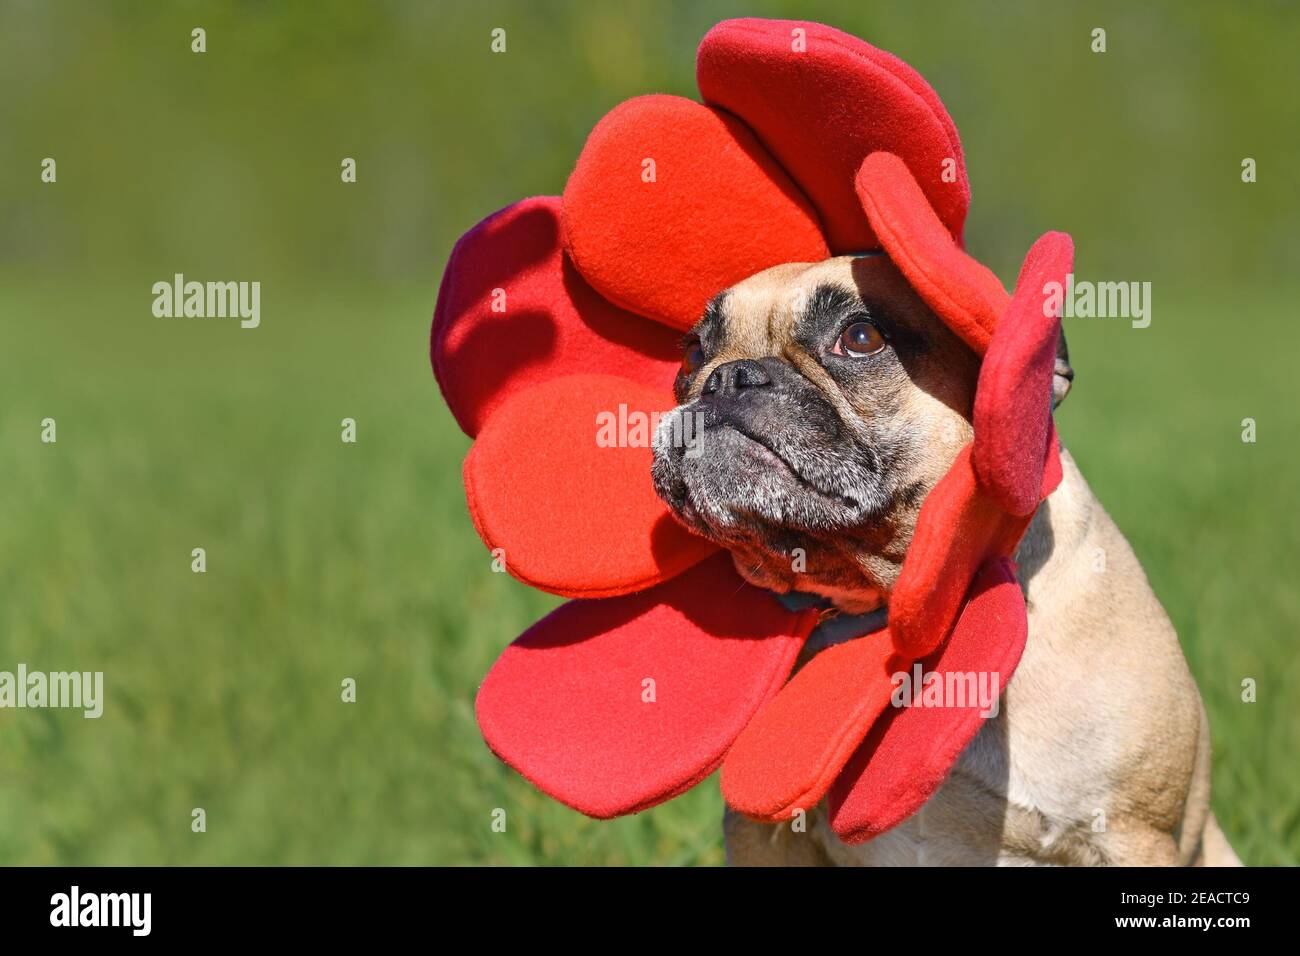 French Bulldog dog dressed up as funny spring flower with red petal headband costume Stock Photo